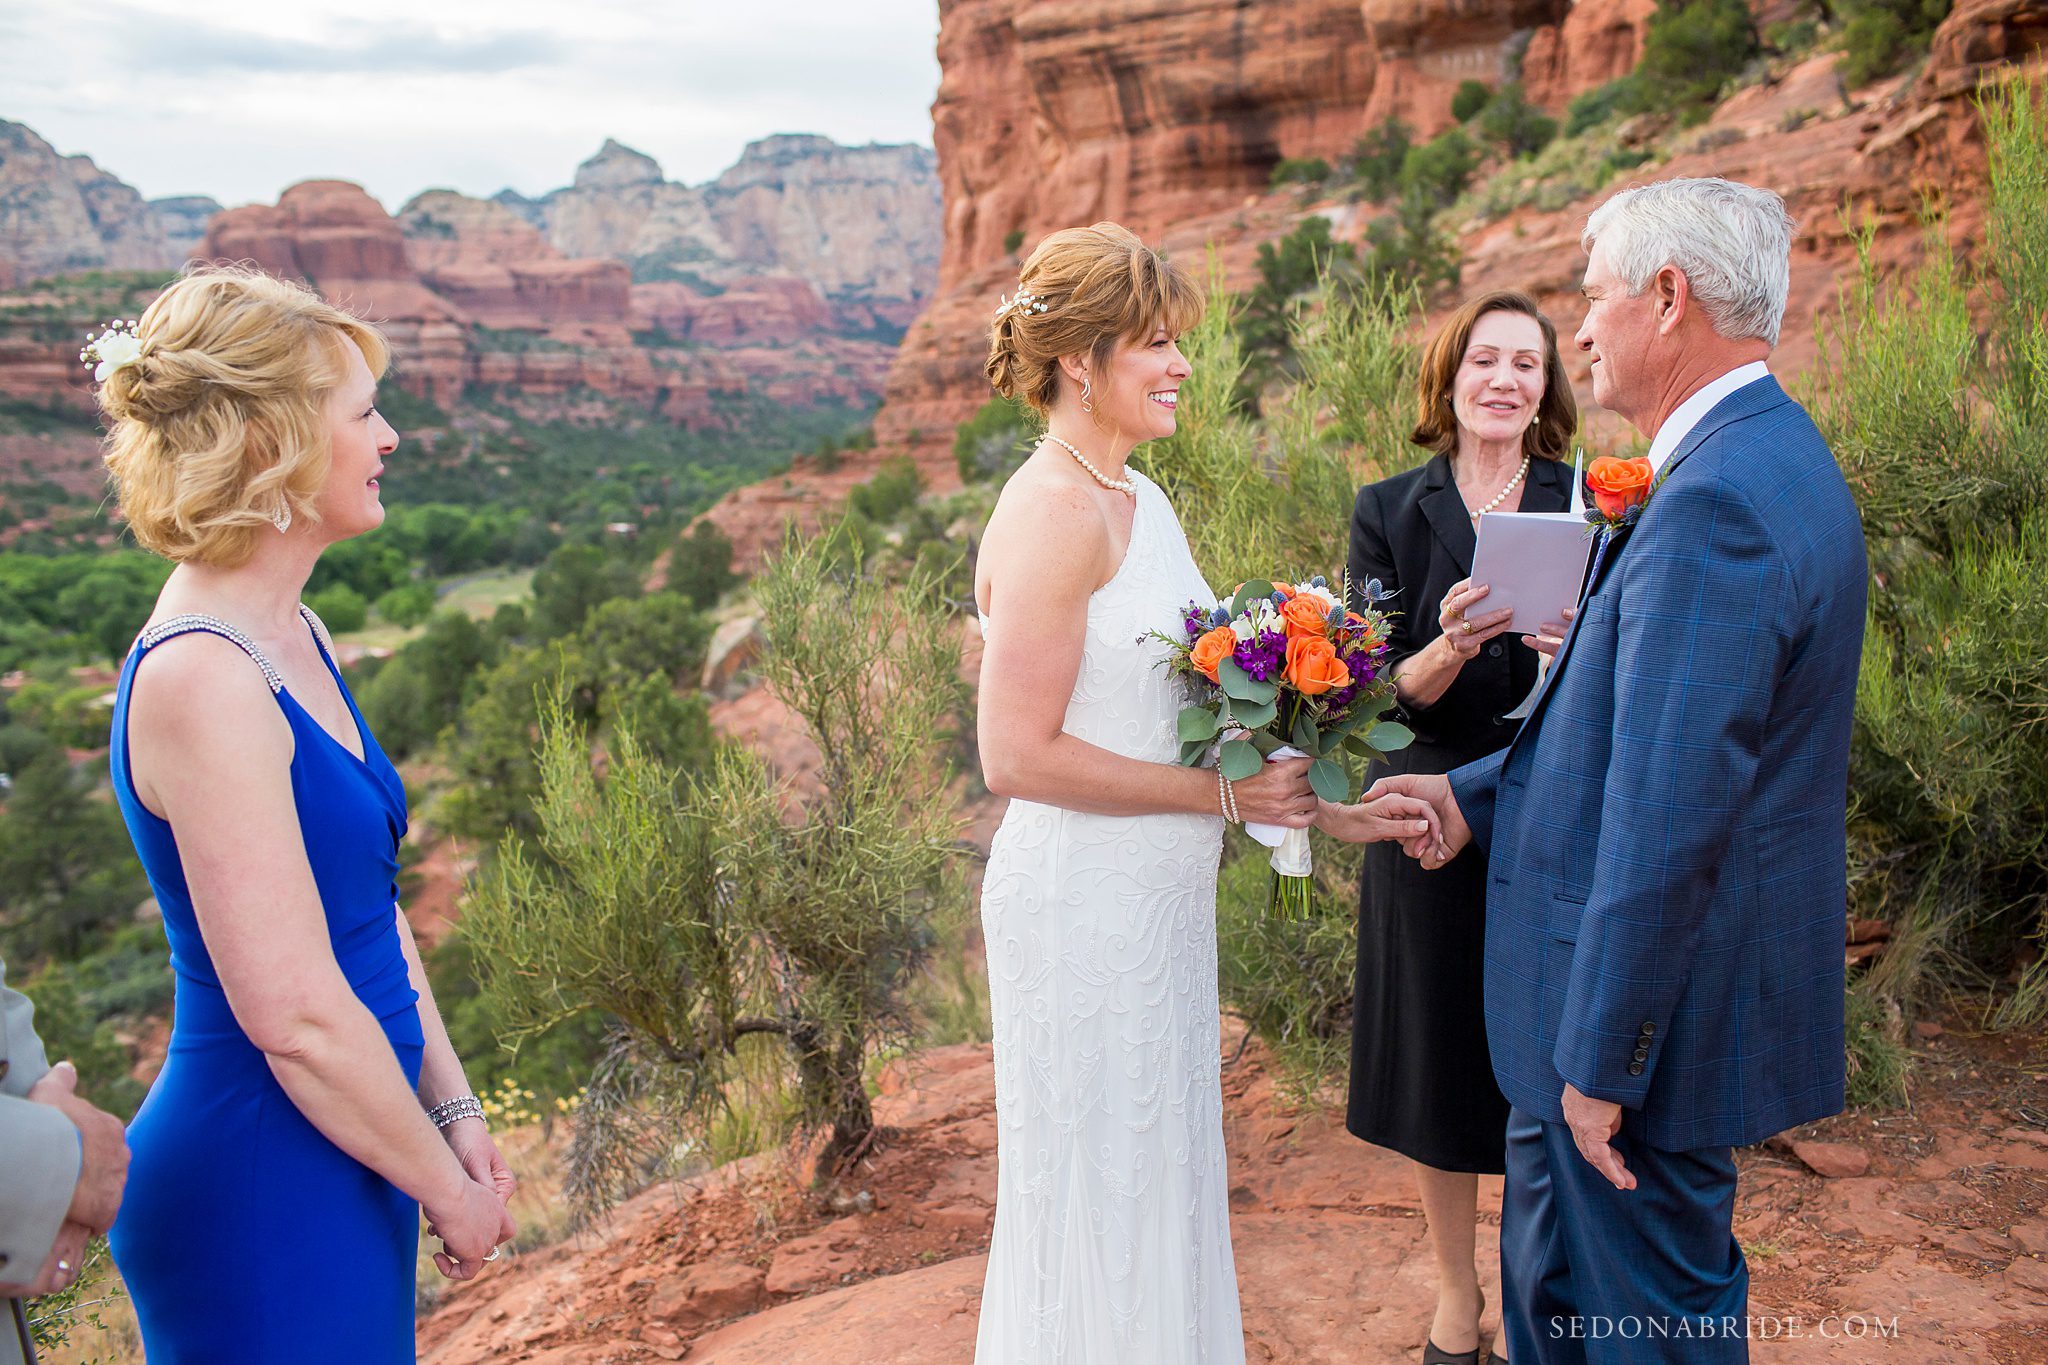 Bride and groom exchanging vows at Enchantment Resort with red rocks in the background